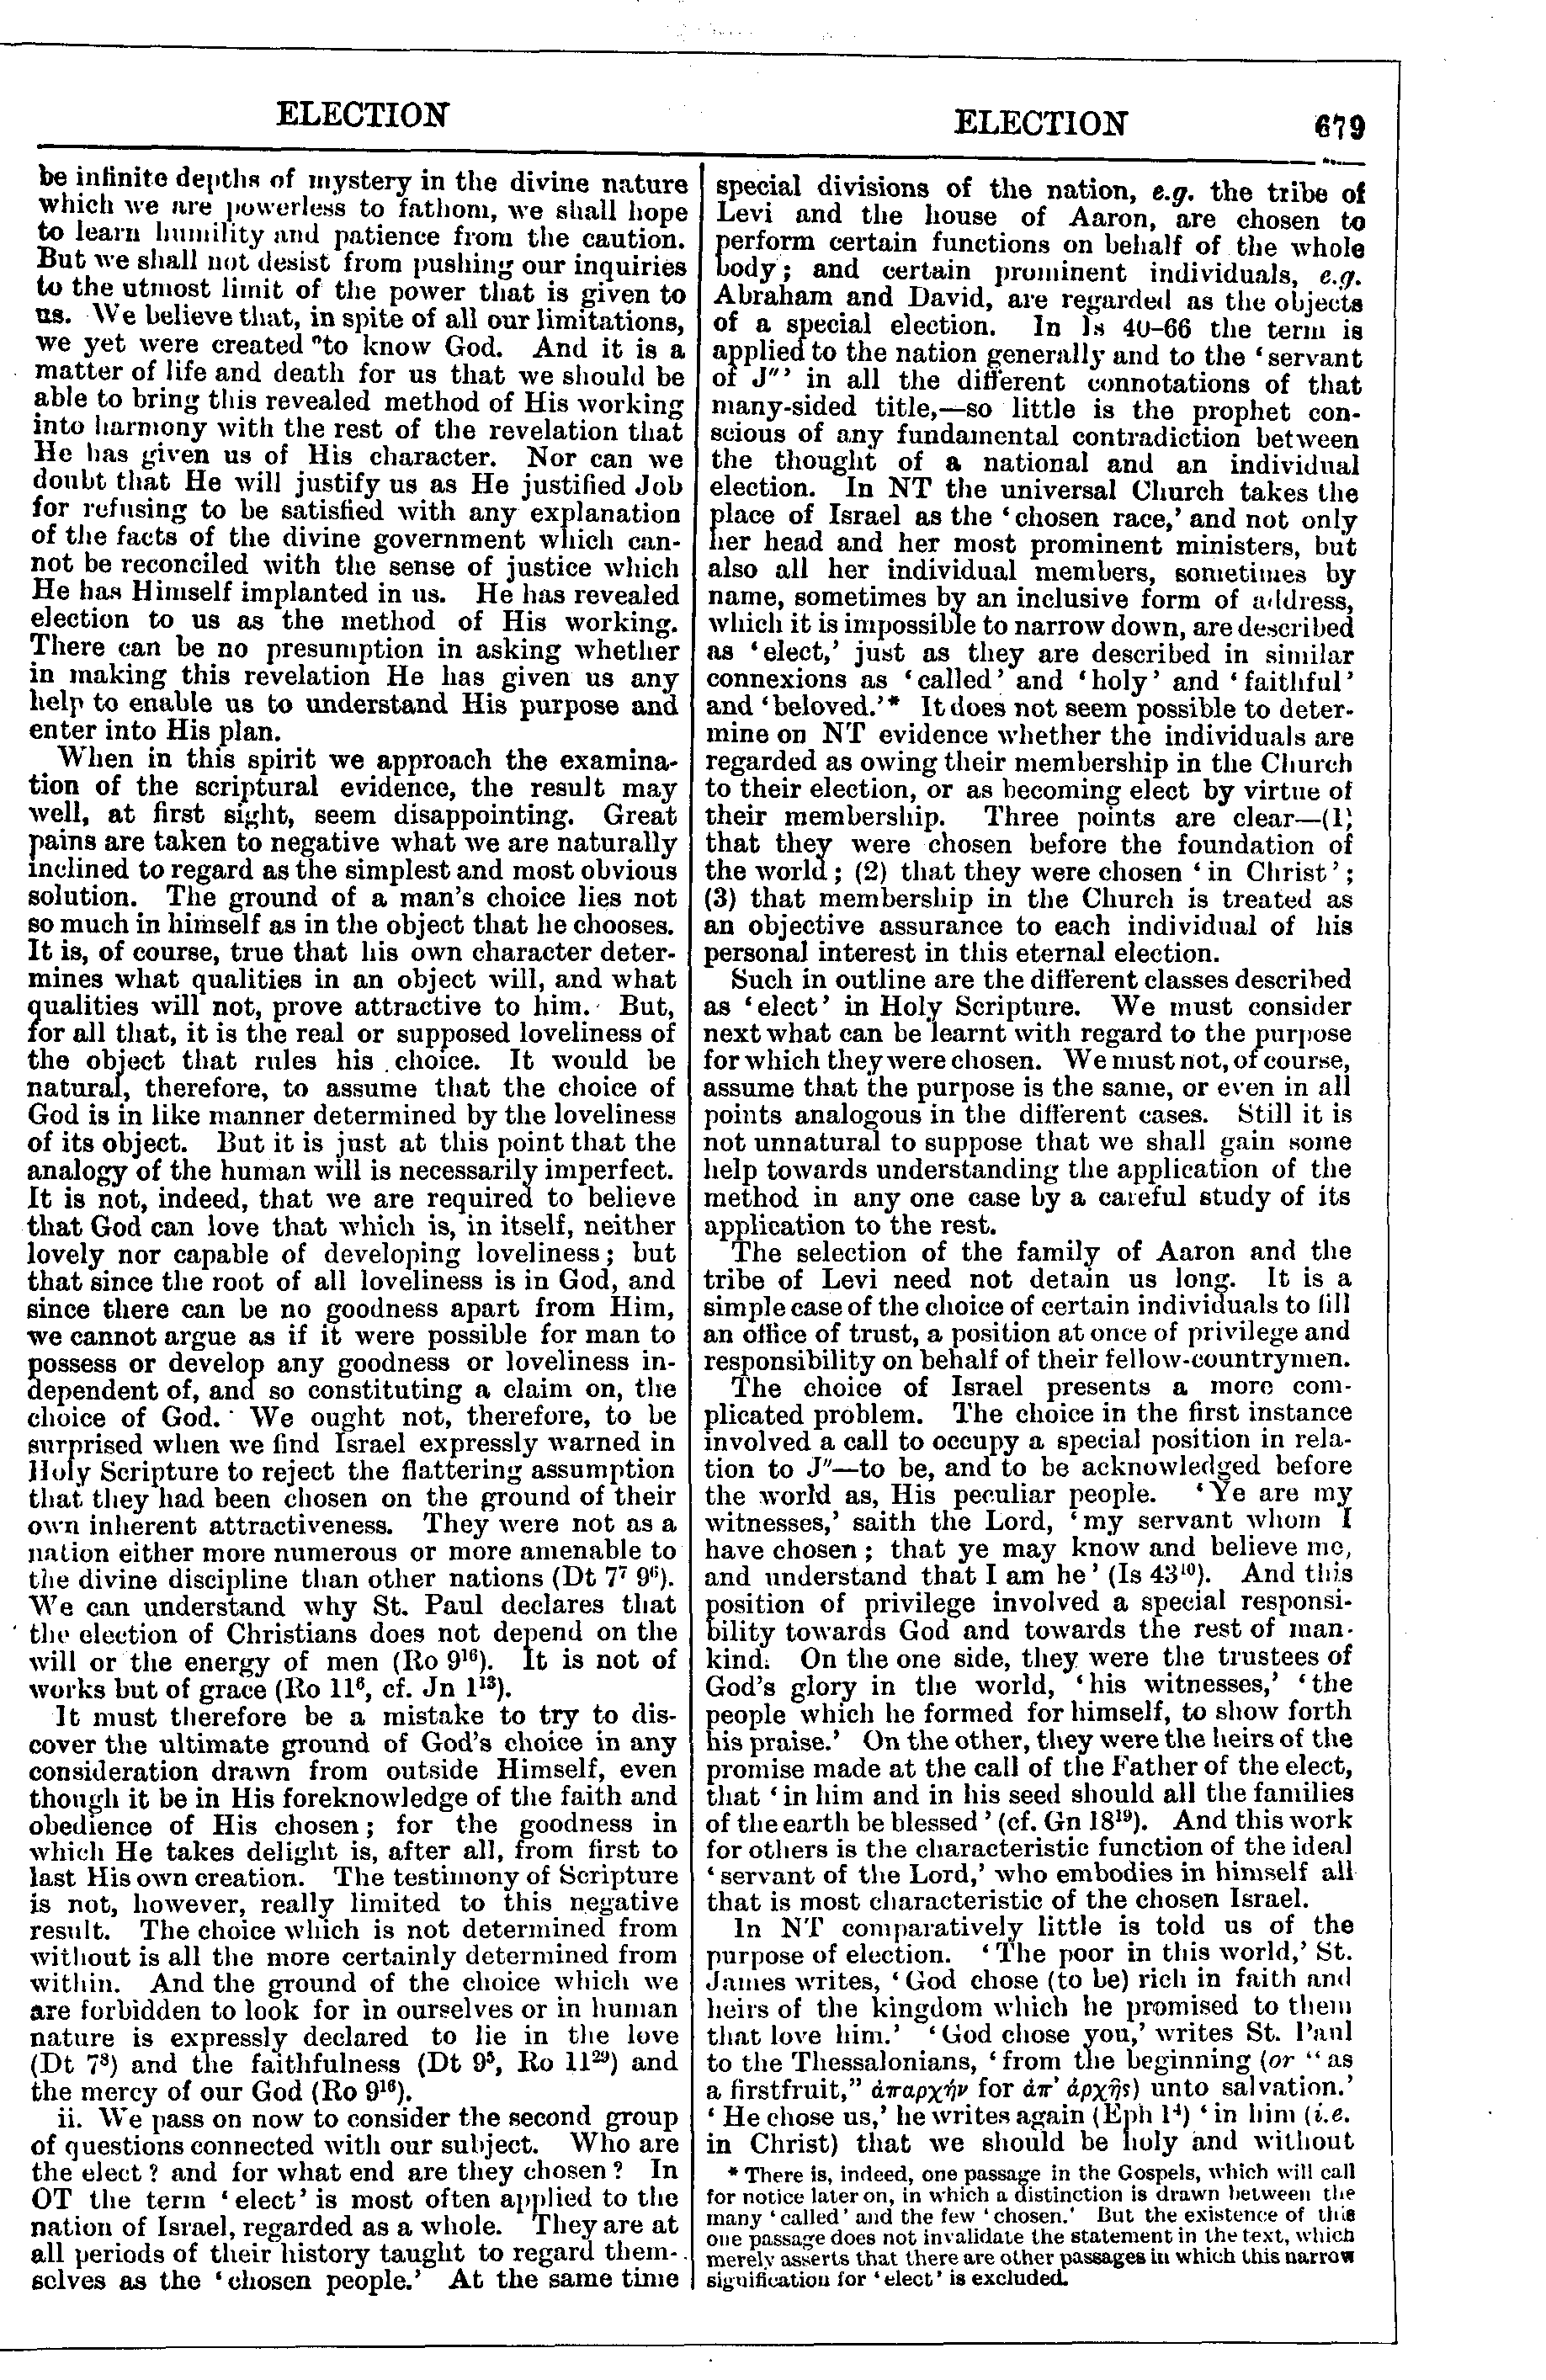 Image of page 679